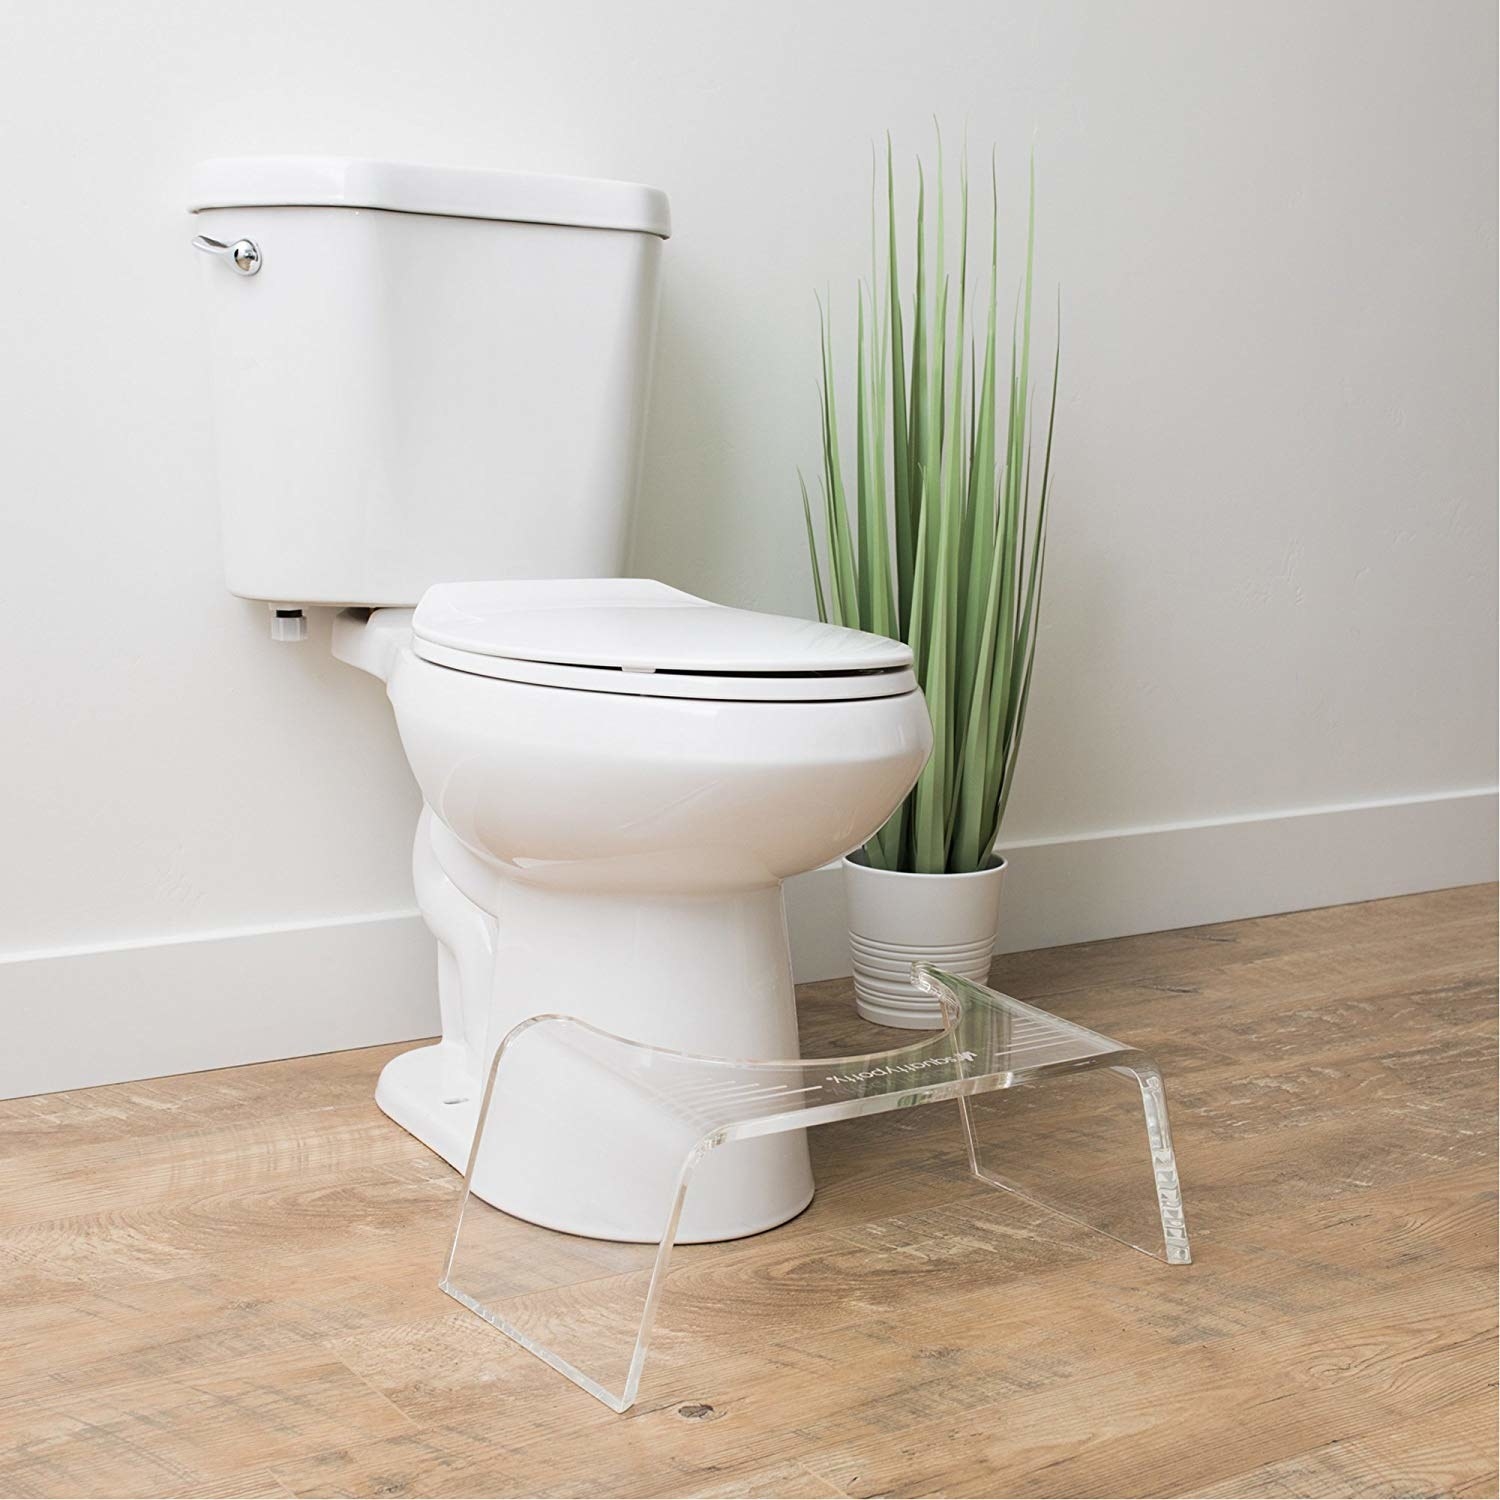 Clear Squatty Potty set up next to toilet 